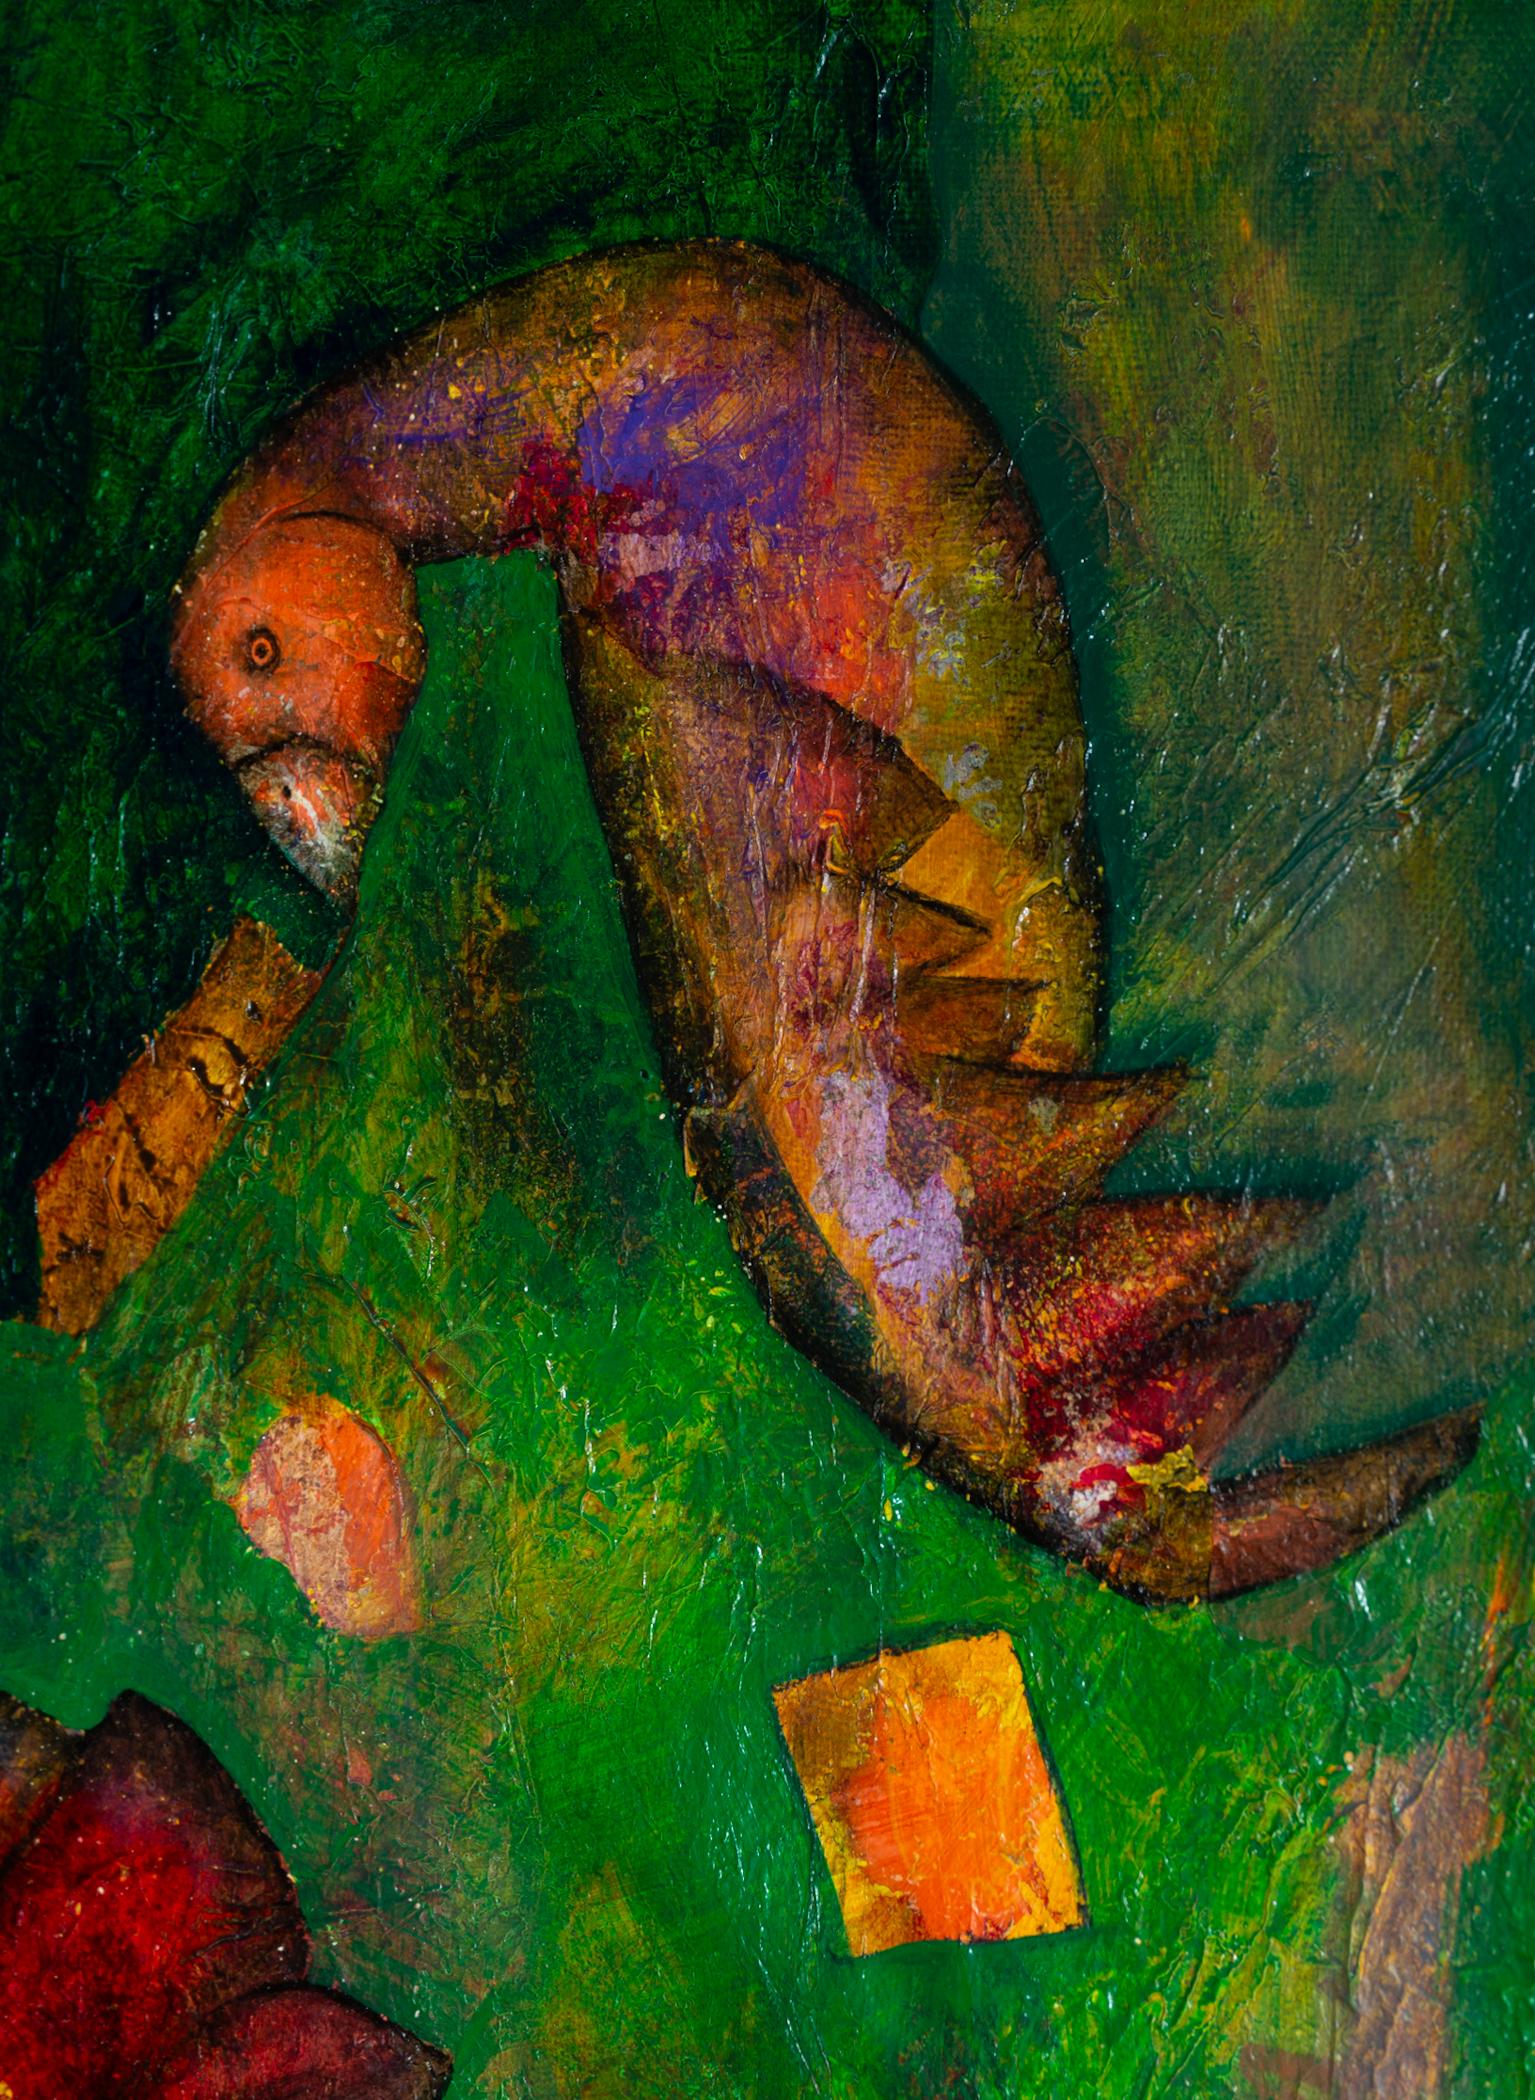 Abstract oil painting green with figures of fantastic animals. Yagé or ayahuasca, moment of connection with the invisible It contains multiple textured layers of material that create a unique depth to the painting, adding a sense of mystery to the